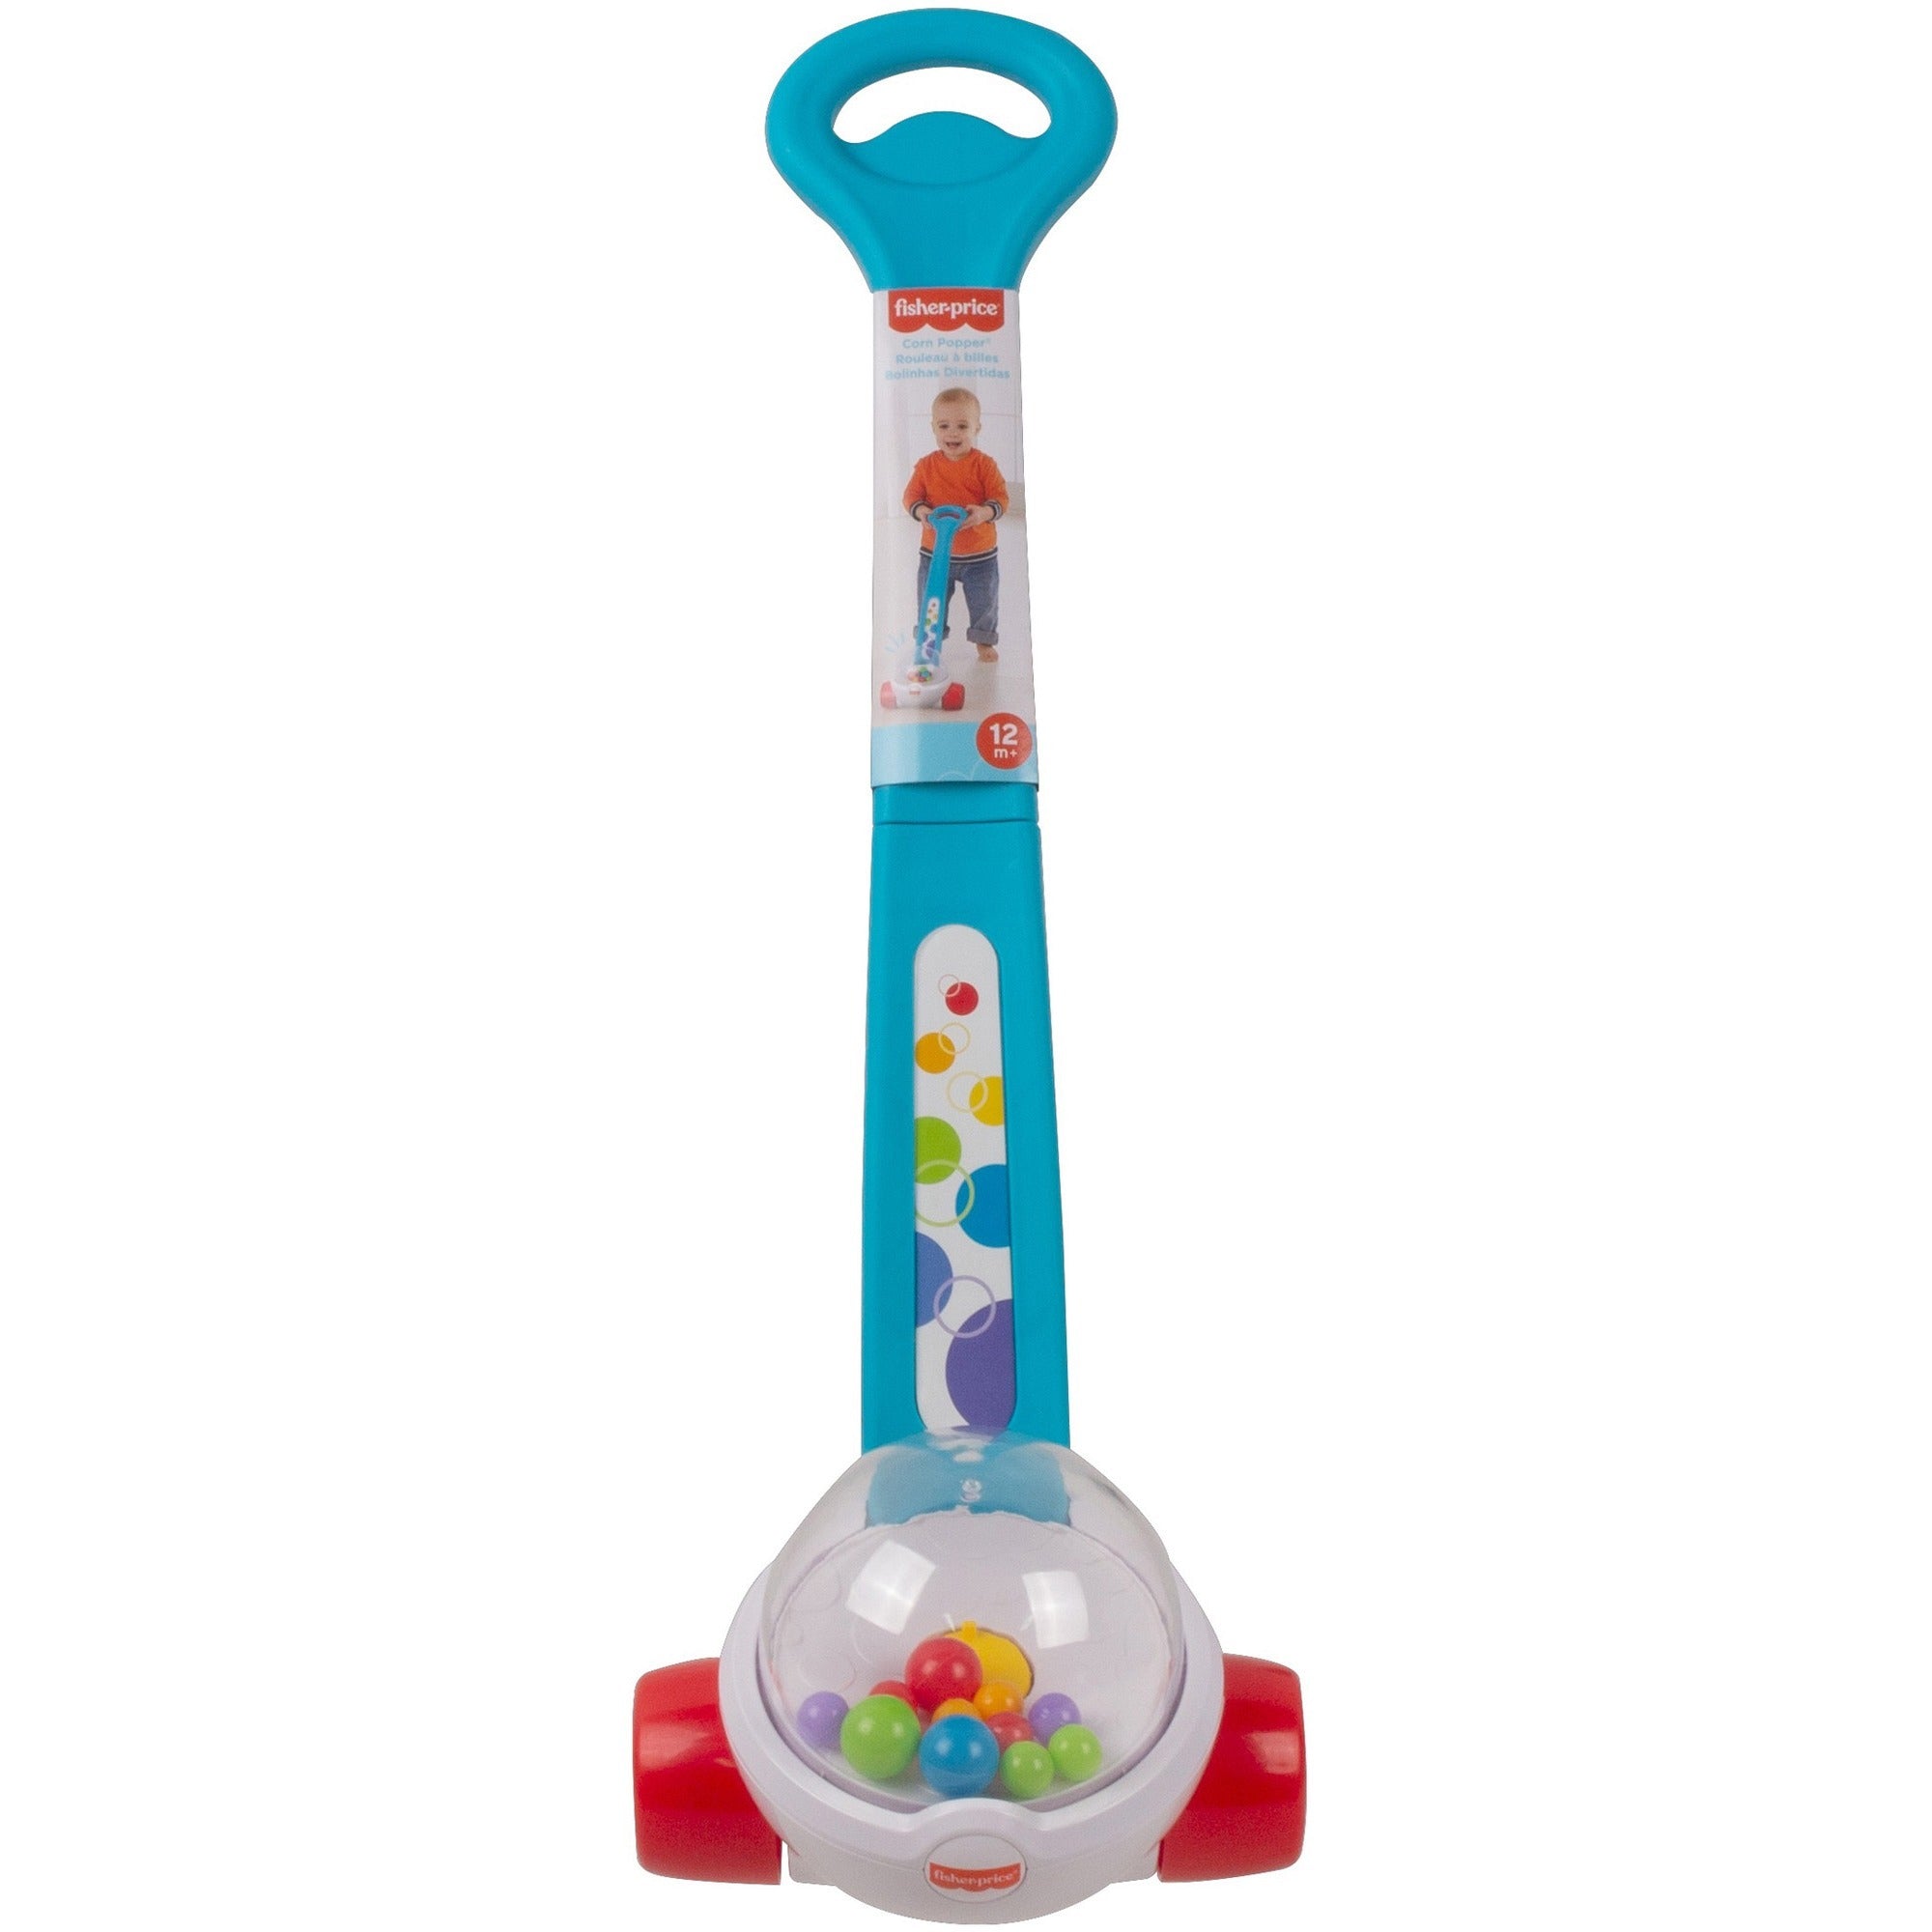 fisher-price-classic-corn-popper-skill-learning-gross-motor-sensory-color-sound-senses-1-3-year-blue_fiphbt55 - 1